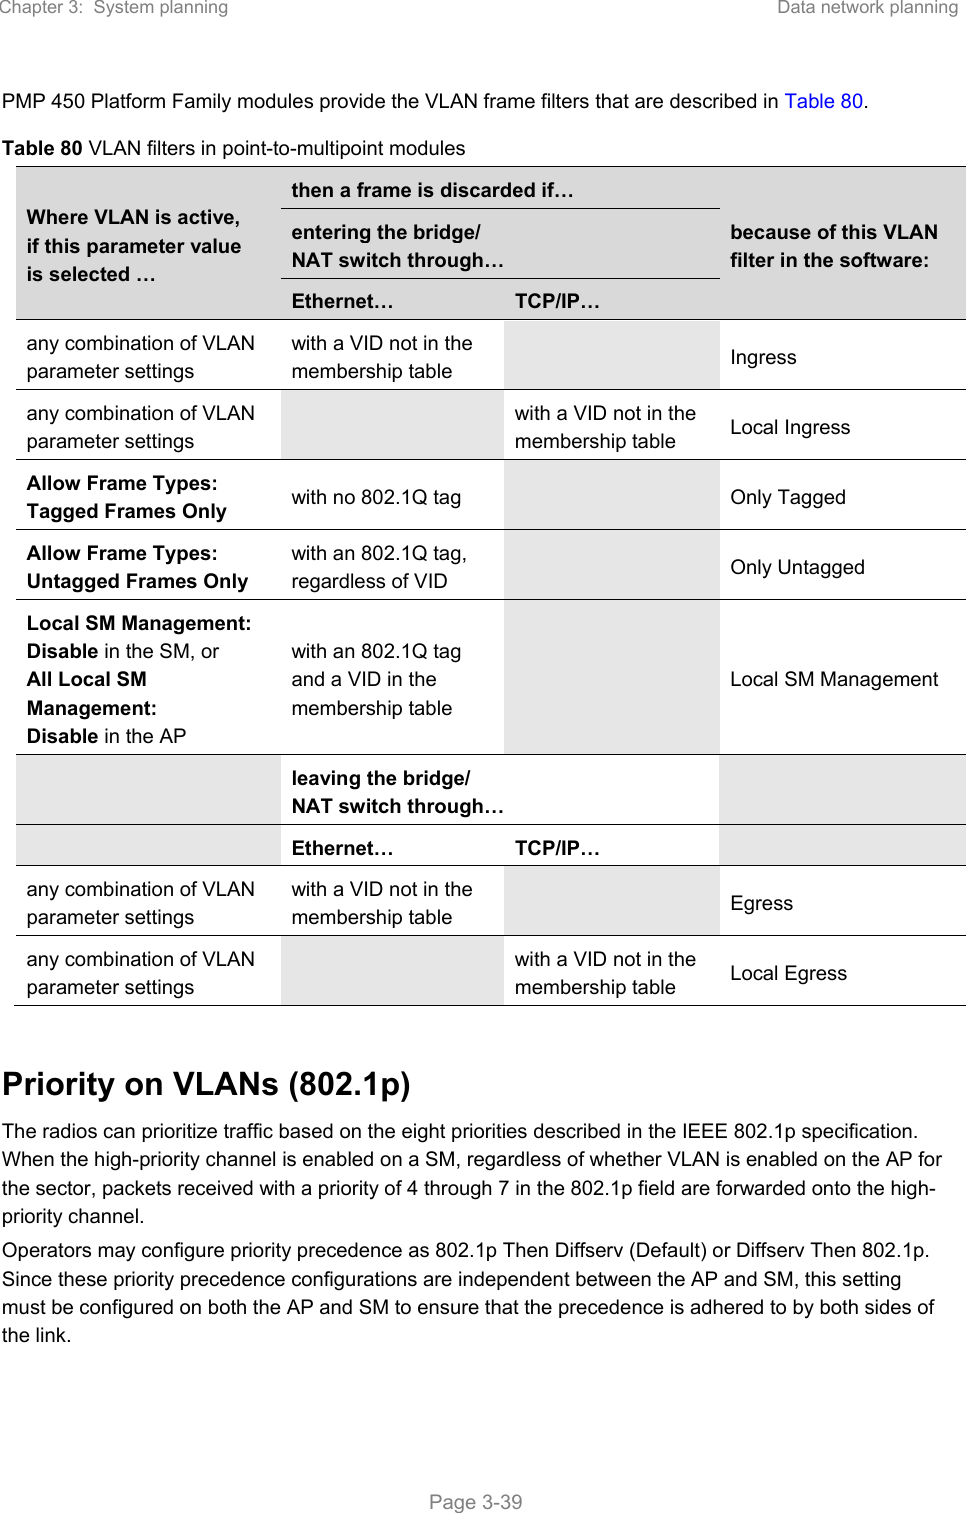 Chapter 3:  System planning  Data network planning   Page 3-39 PMP 450 Platform Family modules provide the VLAN frame filters that are described in Table 80. Table 80 VLAN filters in point-to-multipoint modules Where VLAN is active, if this parameter value is selected … then a frame is discarded if… because of this VLAN filter in the software: entering the bridge/  NAT switch through… Ethernet…  TCP/IP… any combination of VLAN parameter settings with a VID not in the membership table   Ingress any combination of VLAN parameter settings   with a VID not in the membership table  Local Ingress Allow Frame Types: Tagged Frames Only  with no 802.1Q tag    Only Tagged Allow Frame Types: Untagged Frames Only with an 802.1Q tag, regardless of VID    Only Untagged Local SM Management: Disable in the SM, or All Local SM Management: Disable in the AP with an 802.1Q tag and a VID in the membership table   Local SM Management  leaving the bridge/ NAT switch through…    Ethernet…  TCP/IP…   any combination of VLAN parameter settings with a VID not in the membership table    Egress any combination of VLAN parameter settings   with a VID not in the membership table  Local Egress  Priority on VLANs (802.1p) The radios can prioritize traffic based on the eight priorities described in the IEEE 802.1p specification. When the high-priority channel is enabled on a SM, regardless of whether VLAN is enabled on the AP for the sector, packets received with a priority of 4 through 7 in the 802.1p field are forwarded onto the high-priority channel. Operators may configure priority precedence as 802.1p Then Diffserv (Default) or Diffserv Then 802.1p. Since these priority precedence configurations are independent between the AP and SM, this setting must be configured on both the AP and SM to ensure that the precedence is adhered to by both sides of the link.  